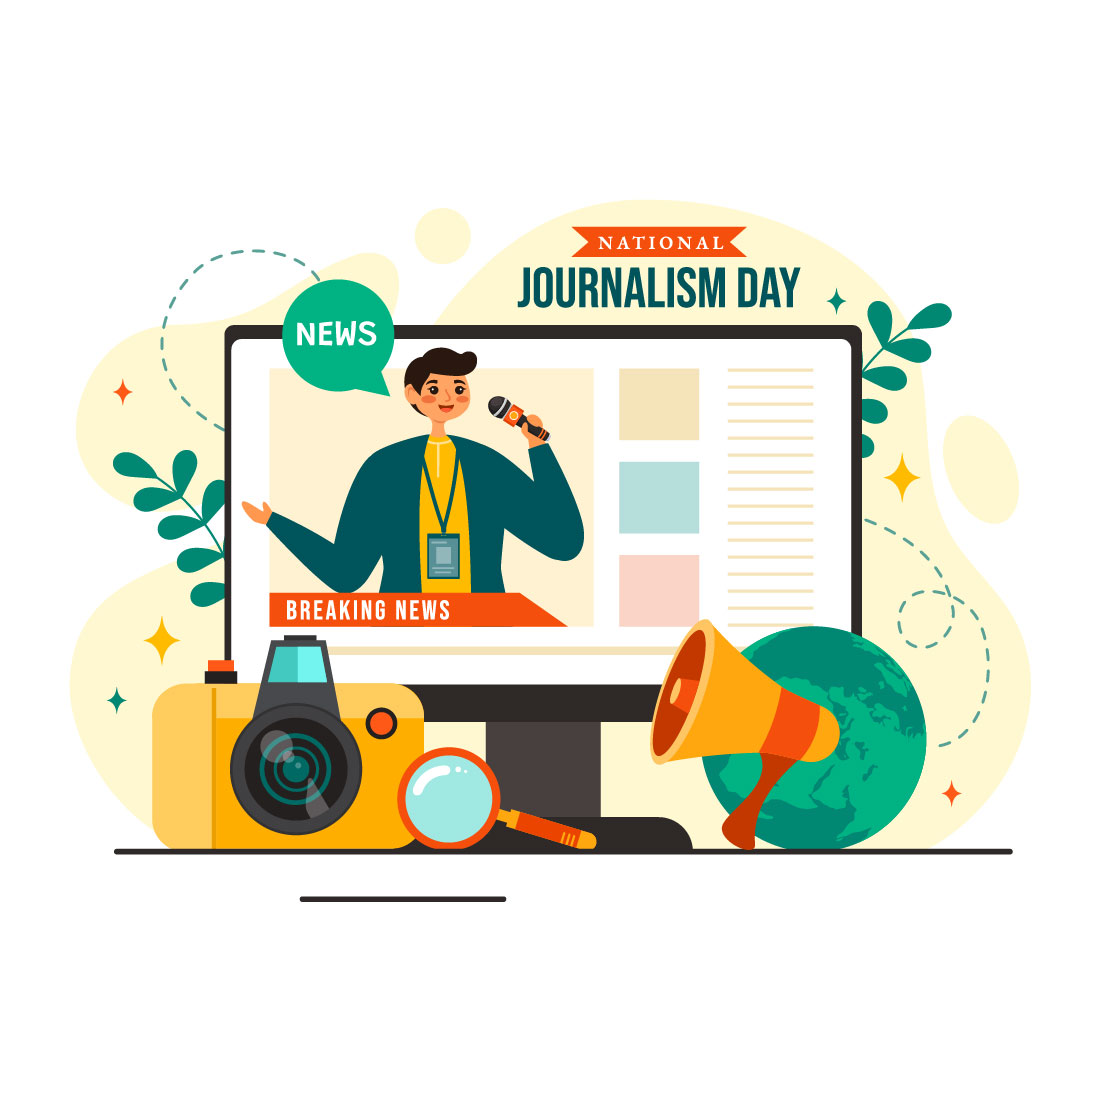 13 National Journalism Day Illustration preview image.